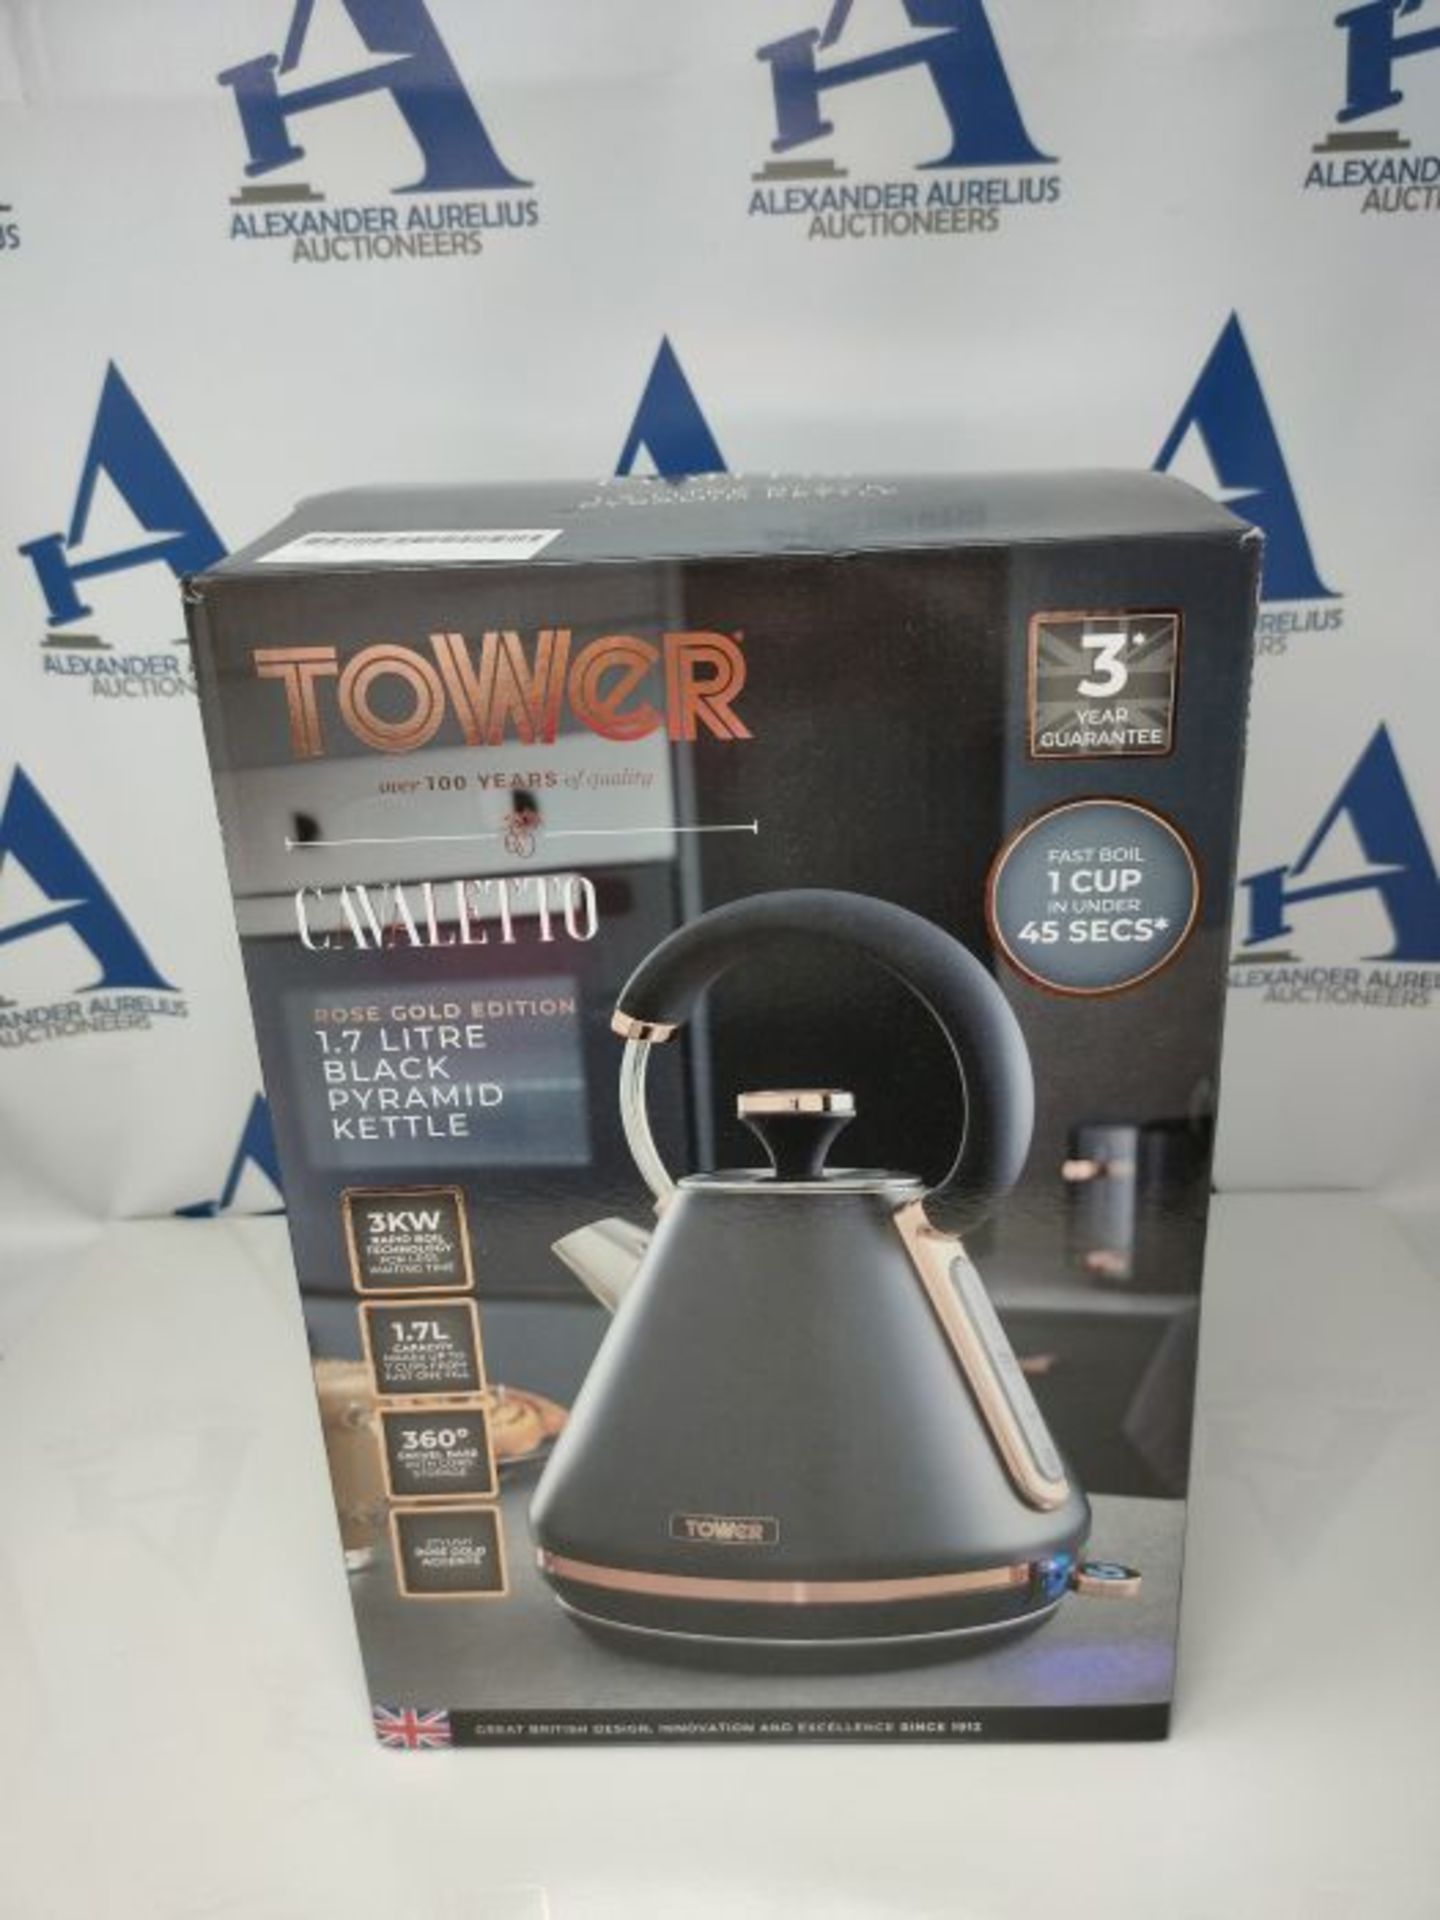 Tower T10044RG Cavaletto Pyramid Kettle with Fast Boil, Detachable Filter, 1.7 Litre, - Image 2 of 3